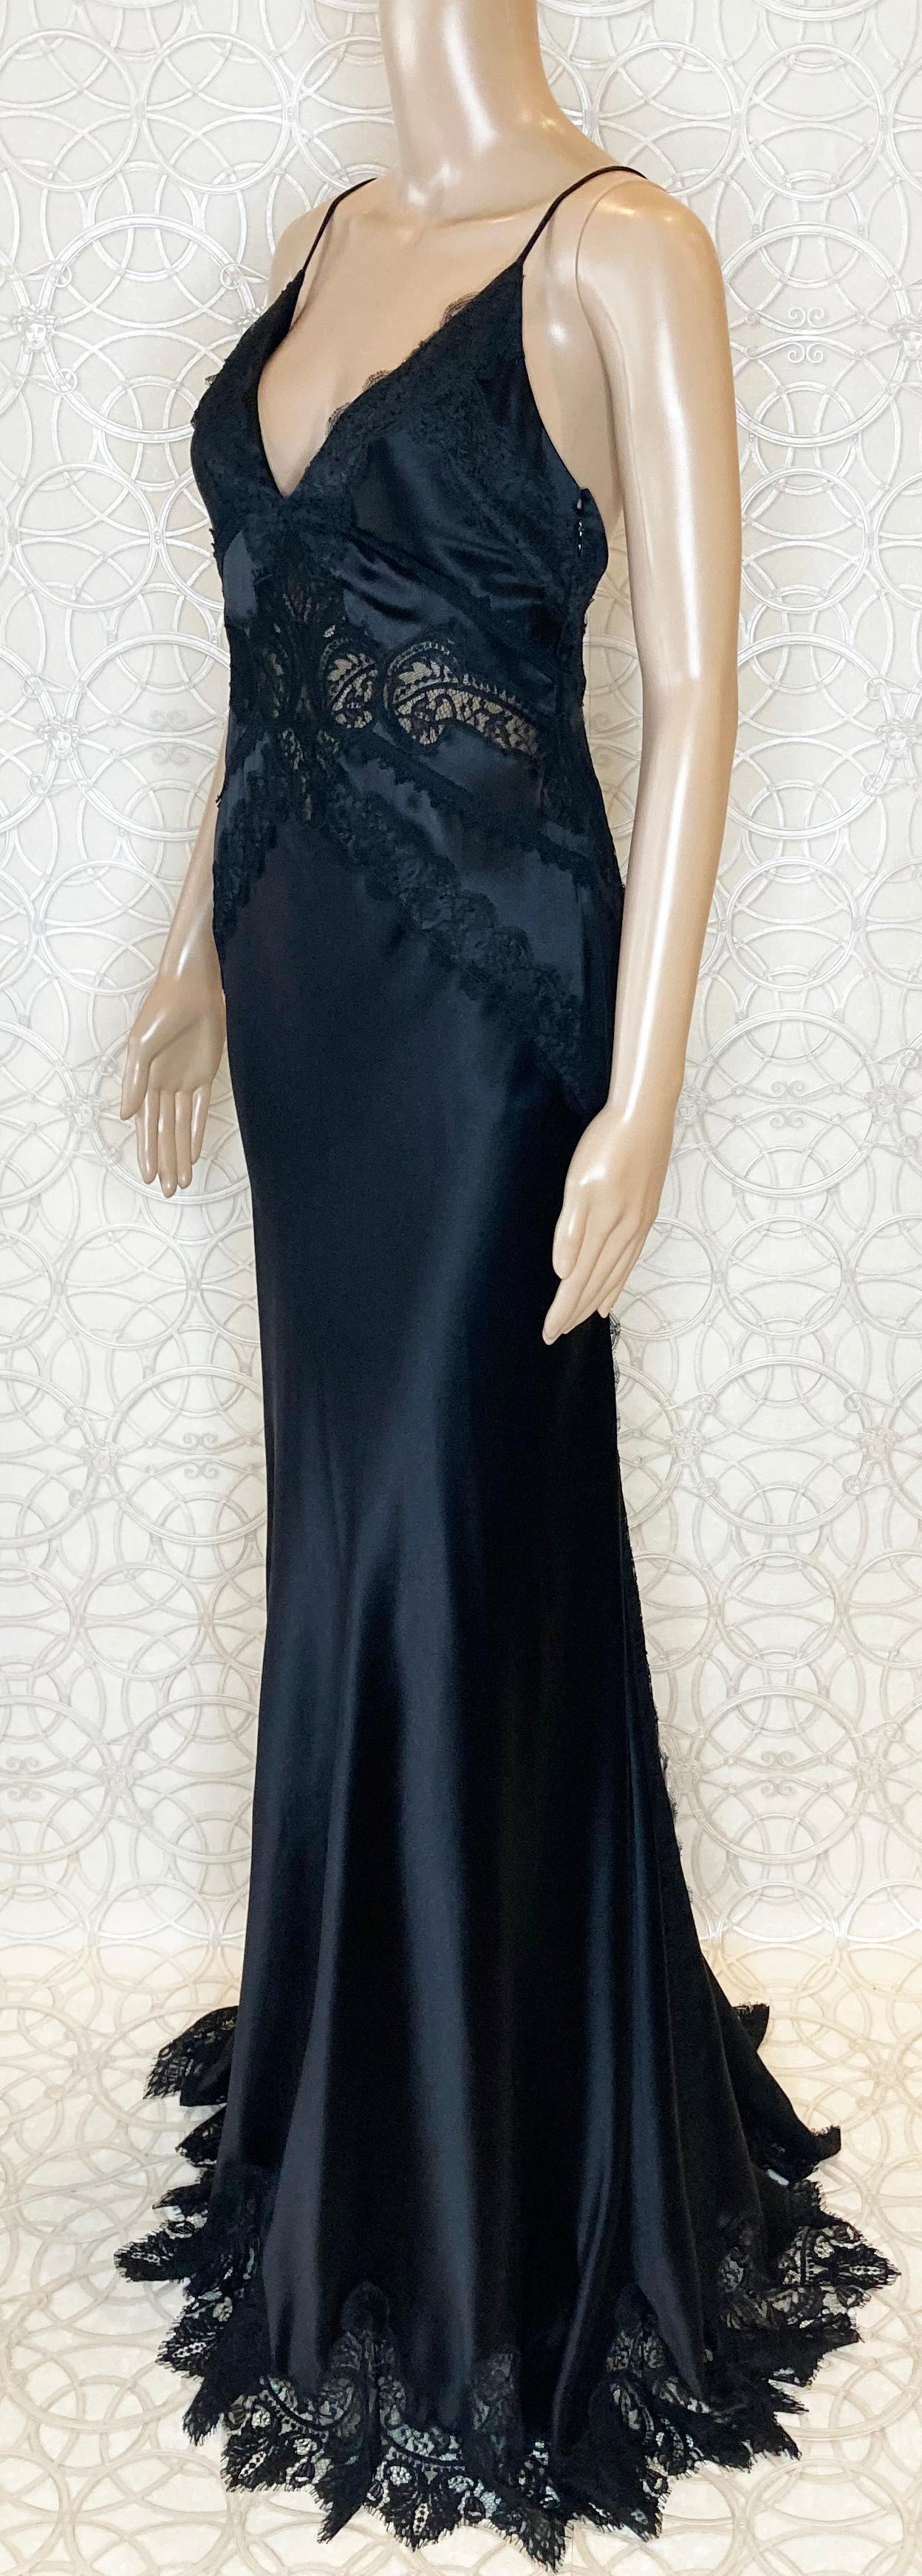 Women's VINTAGE VERSACE BLACK SILK and LACE LONG GOWN DRESS 40 - 4 For Sale